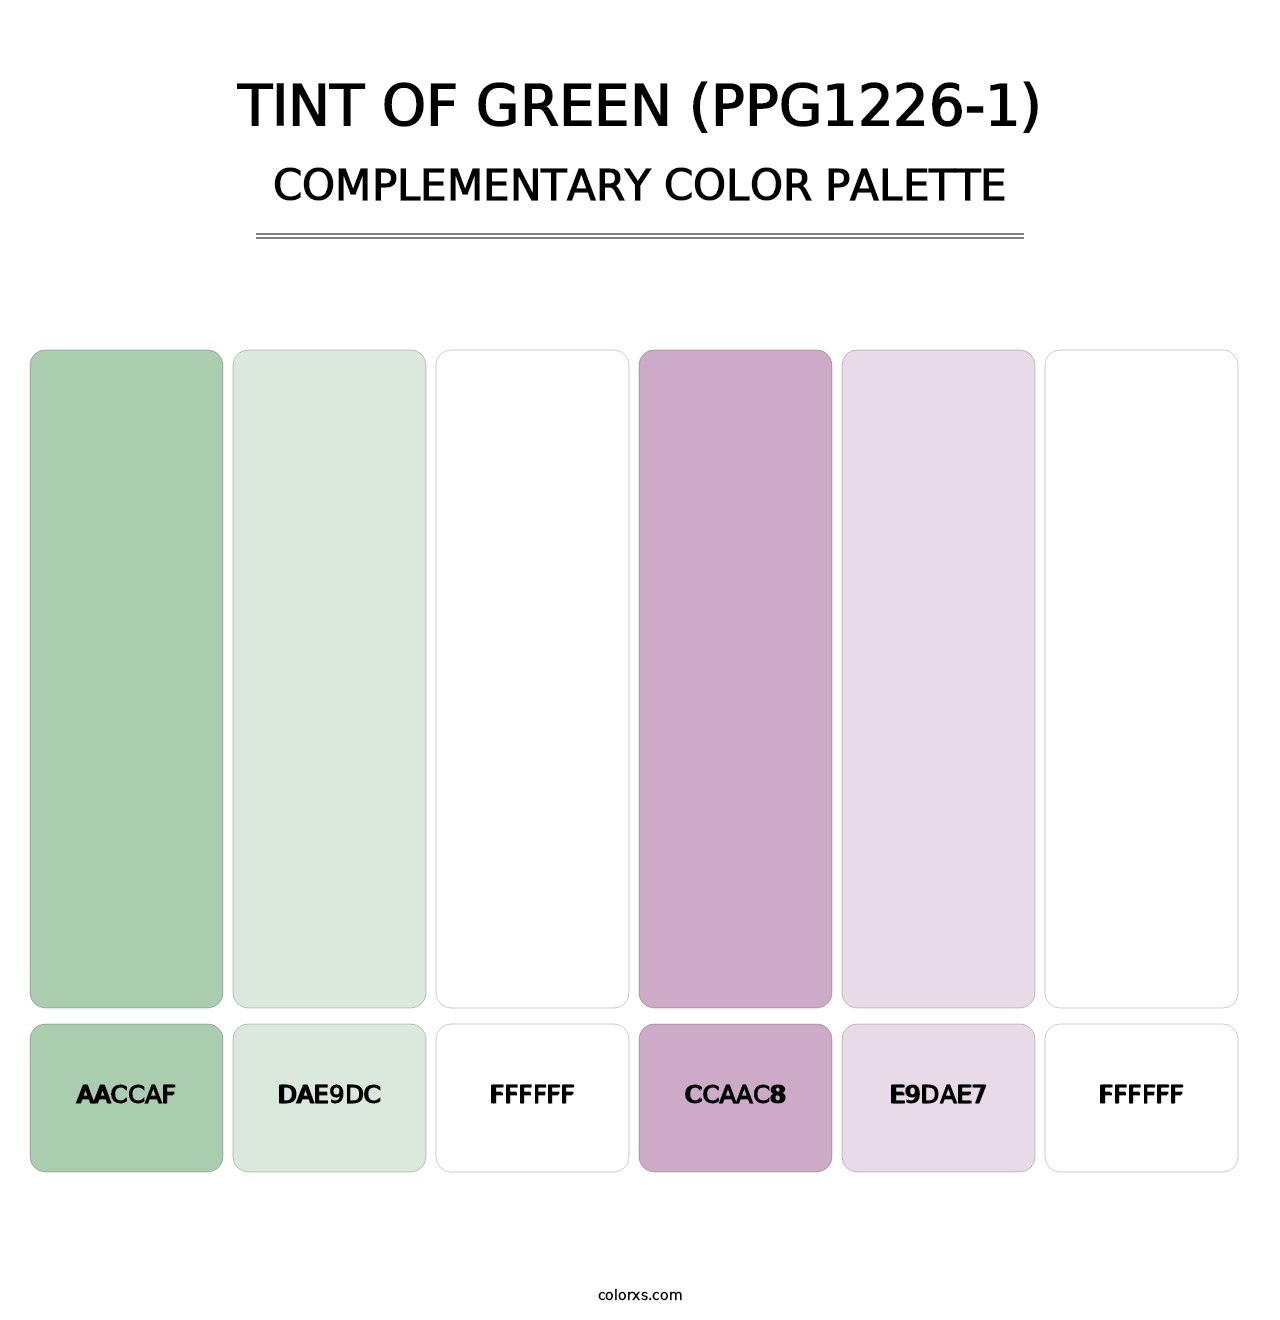 Tint Of Green (PPG1226-1) - Complementary Color Palette